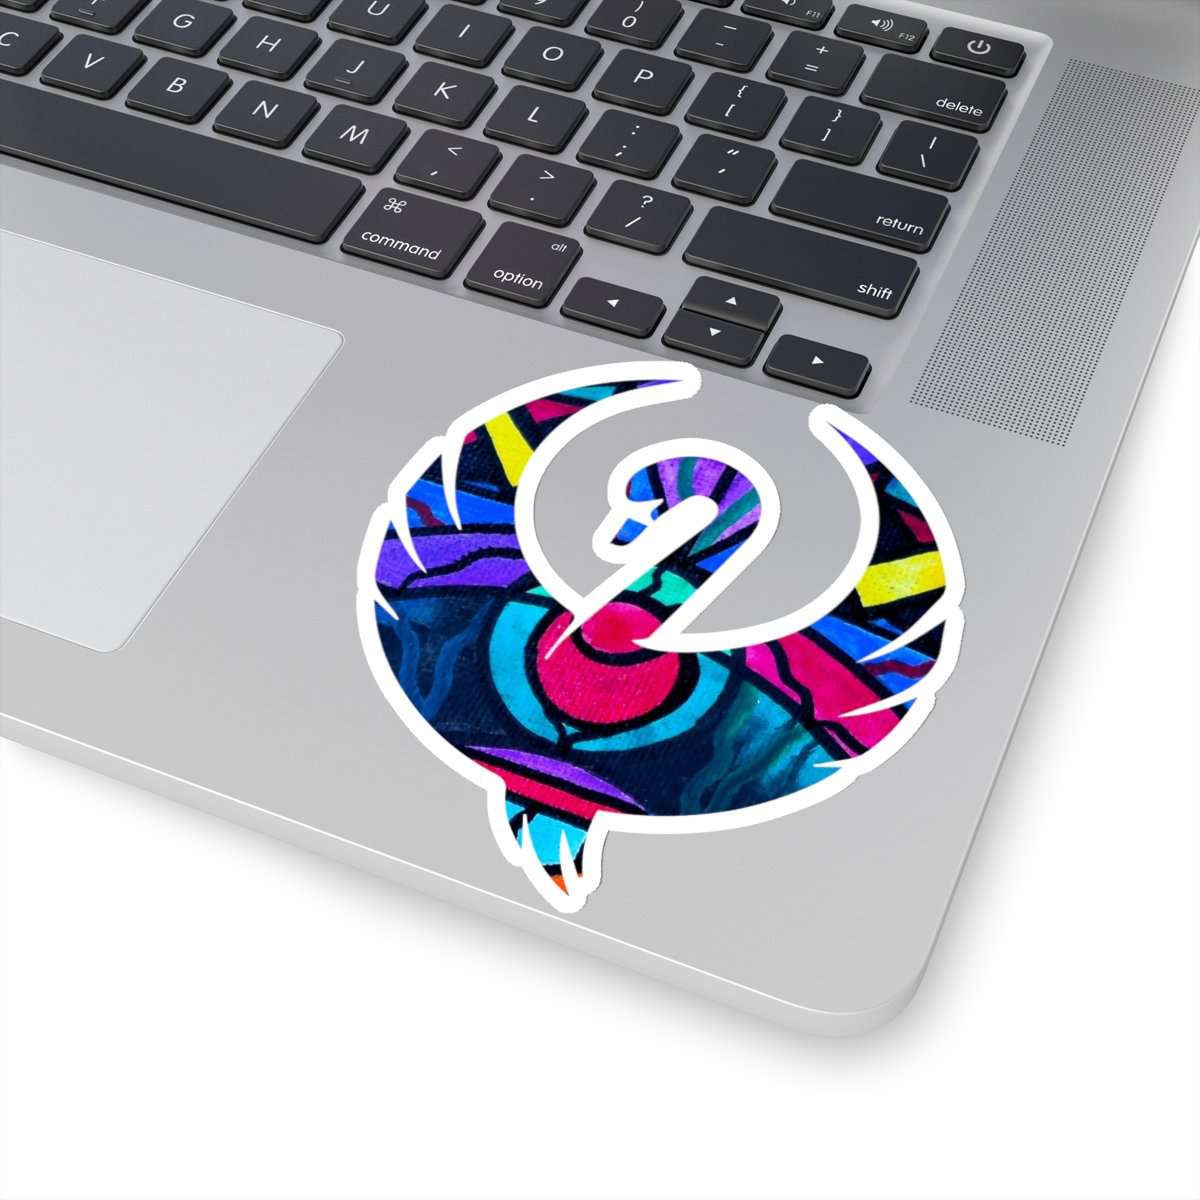 a-place-to-buy-integrity-swan-stickers-fashion_11.jpg